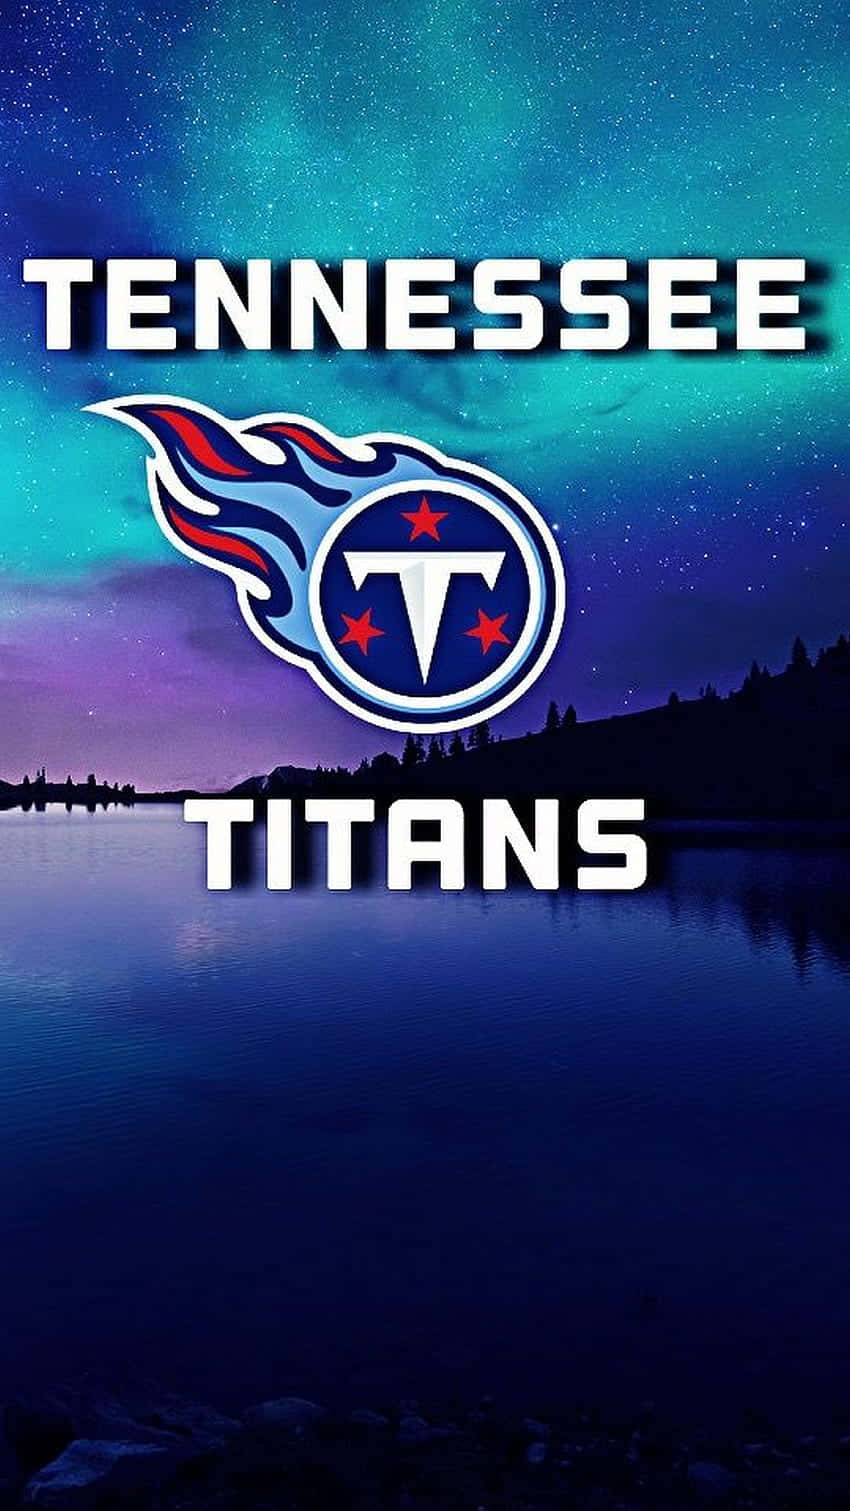 Celebrate Your Titans Pride With This Tennessee Titans iPhone Wallpaper Wallpaper